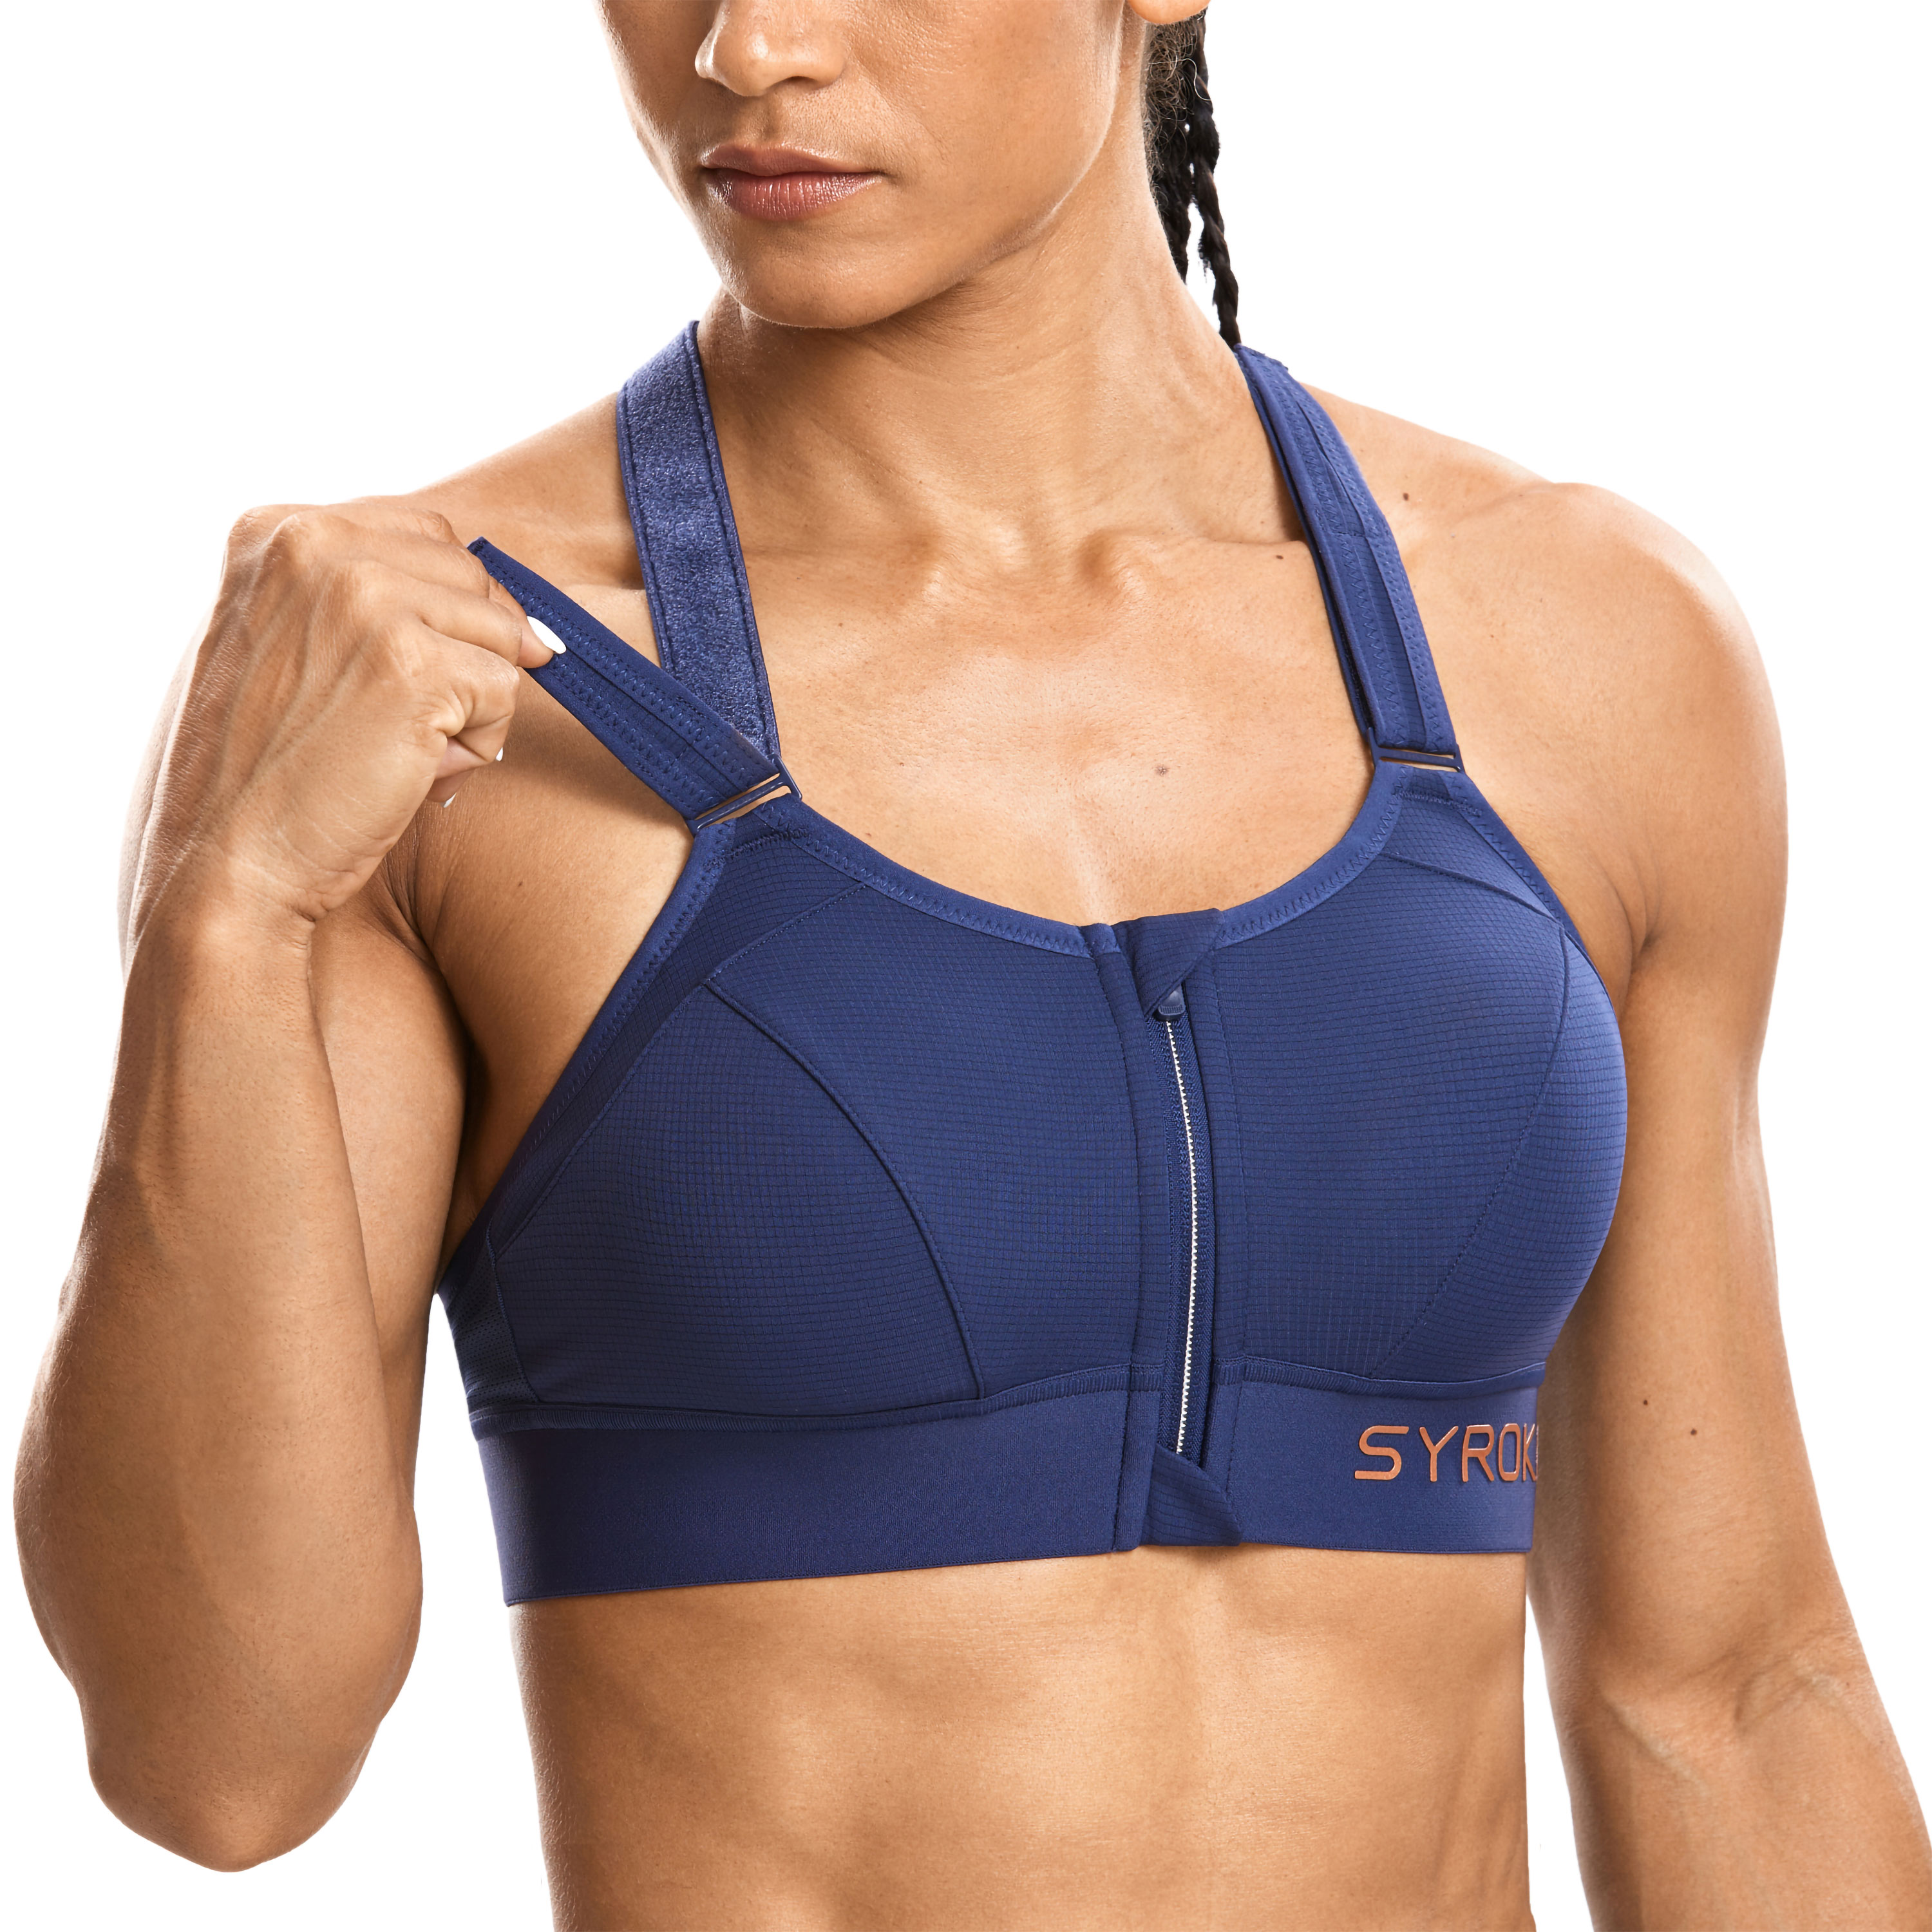 32D SYROKAN Sports Bra Front Adjustable High Impact Support Padded Wireless